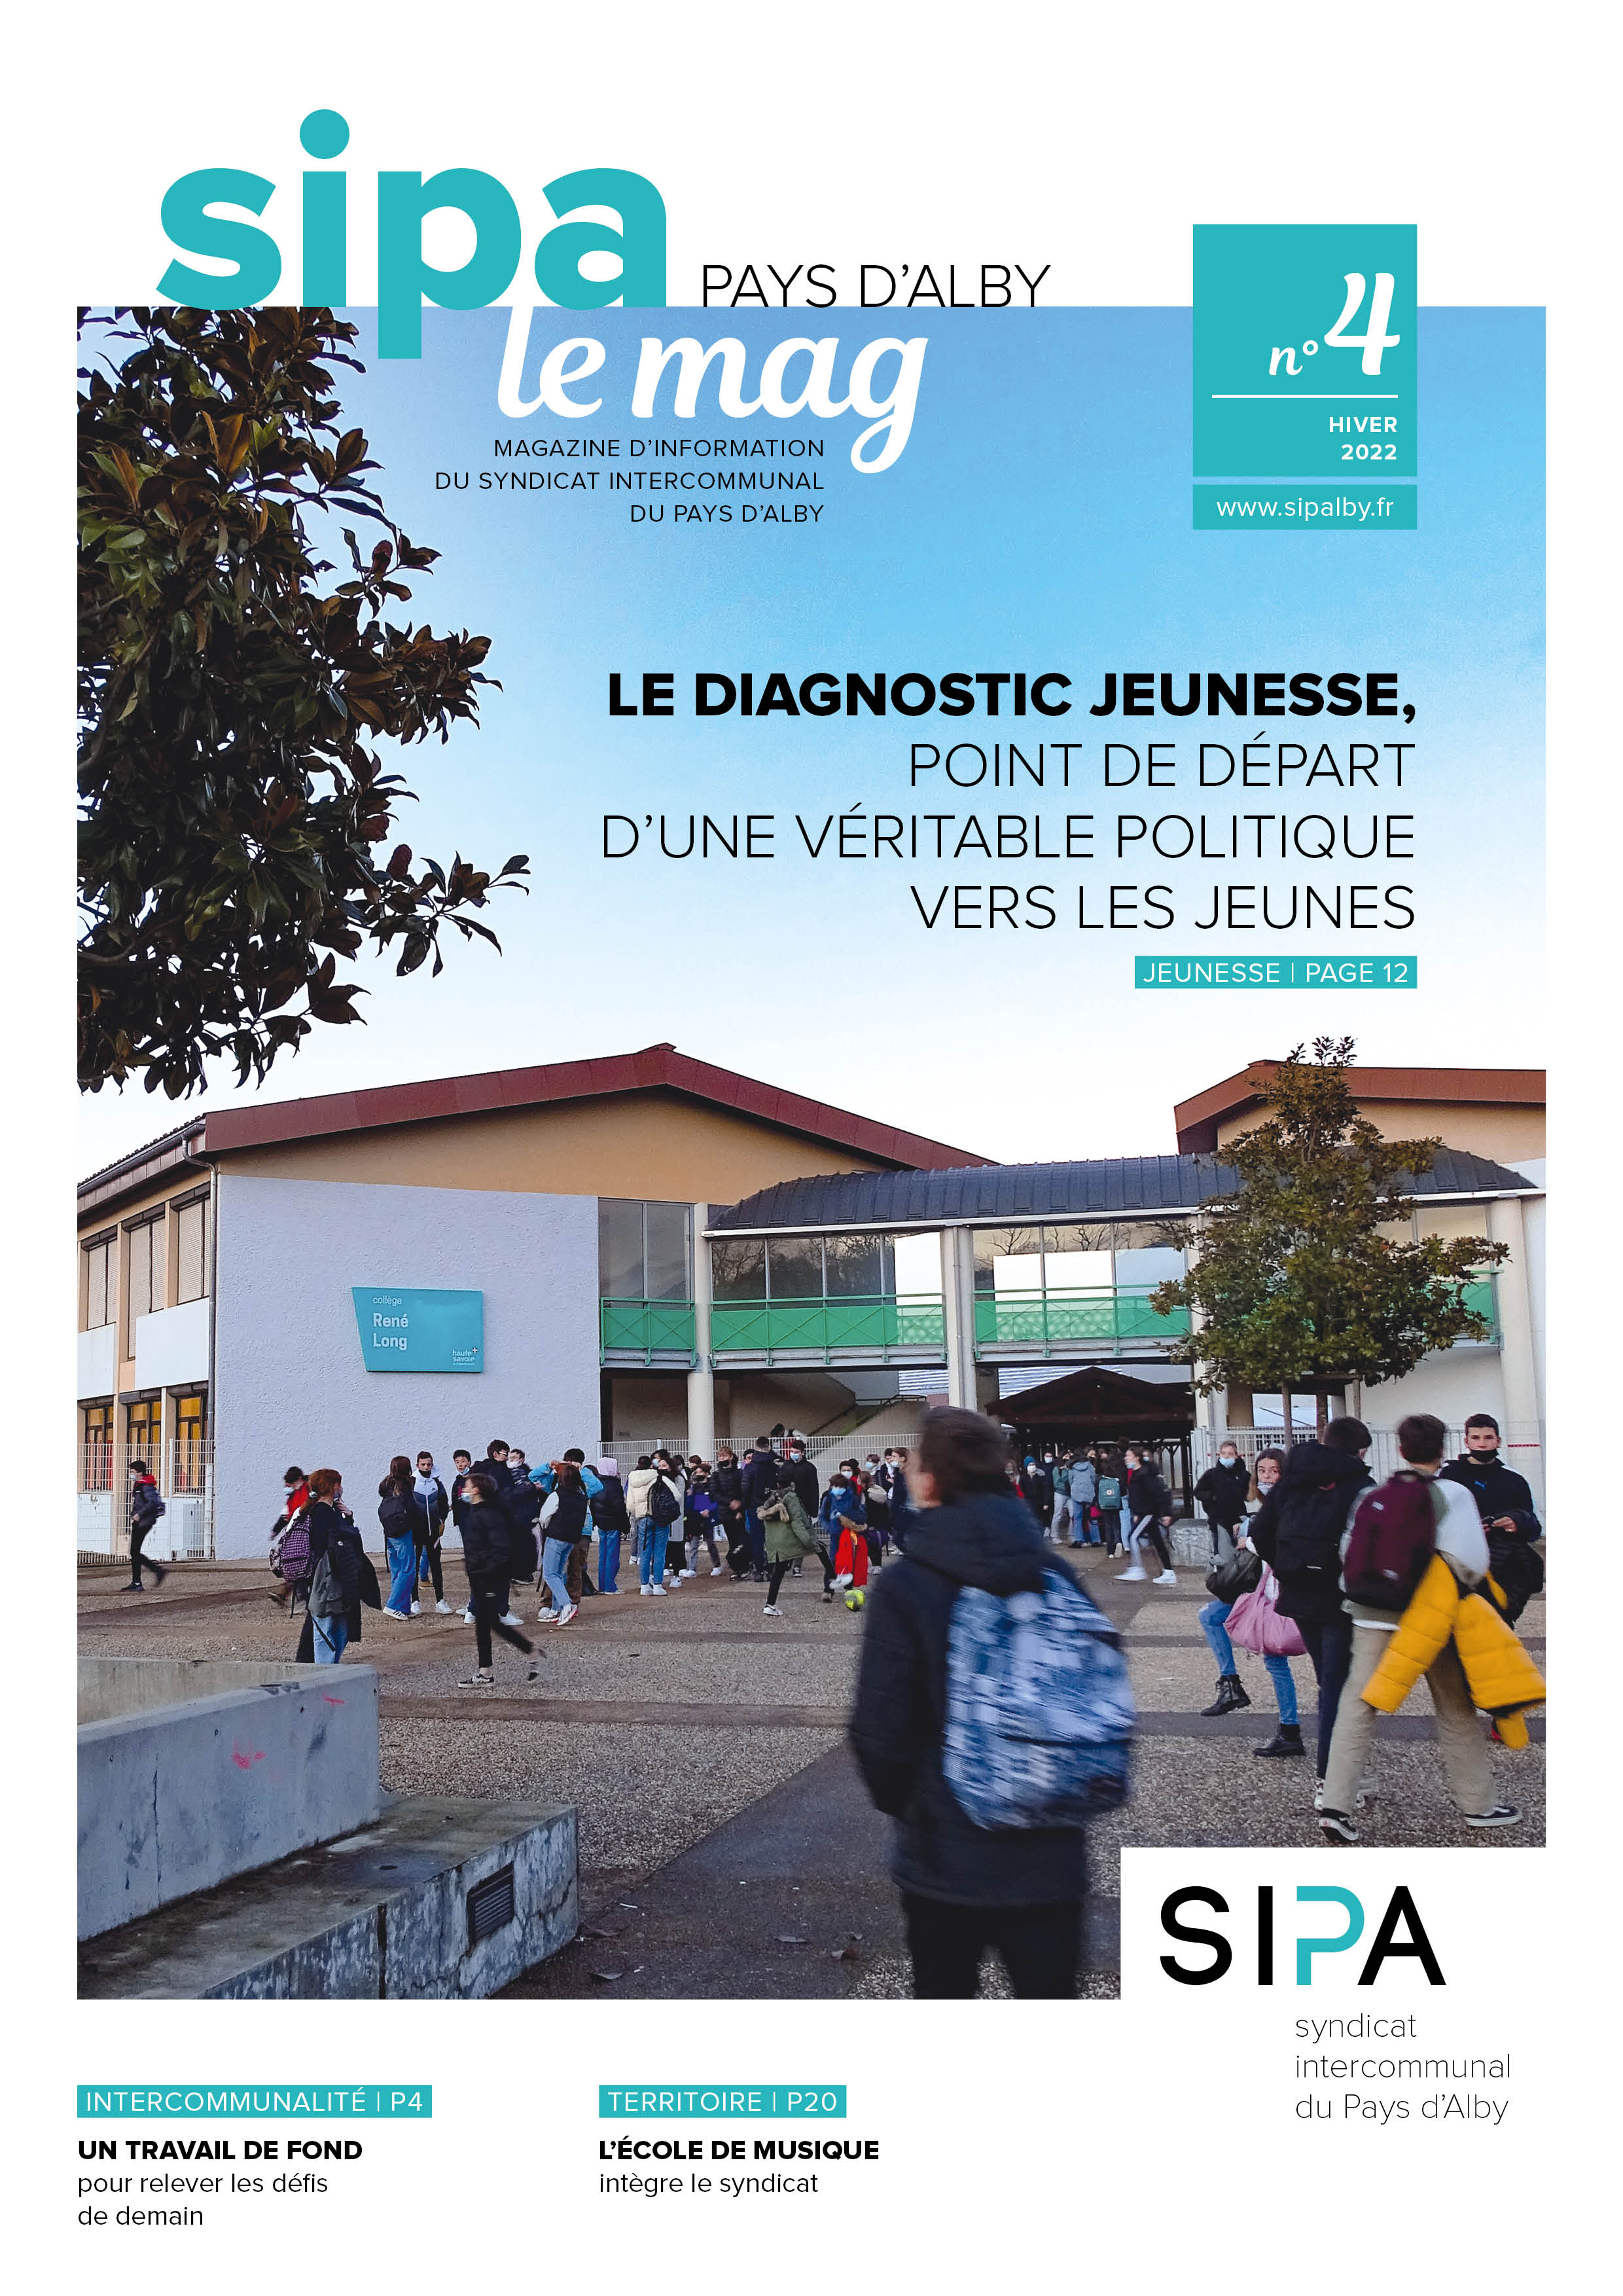 MagSIPA-4_couverture.jpg